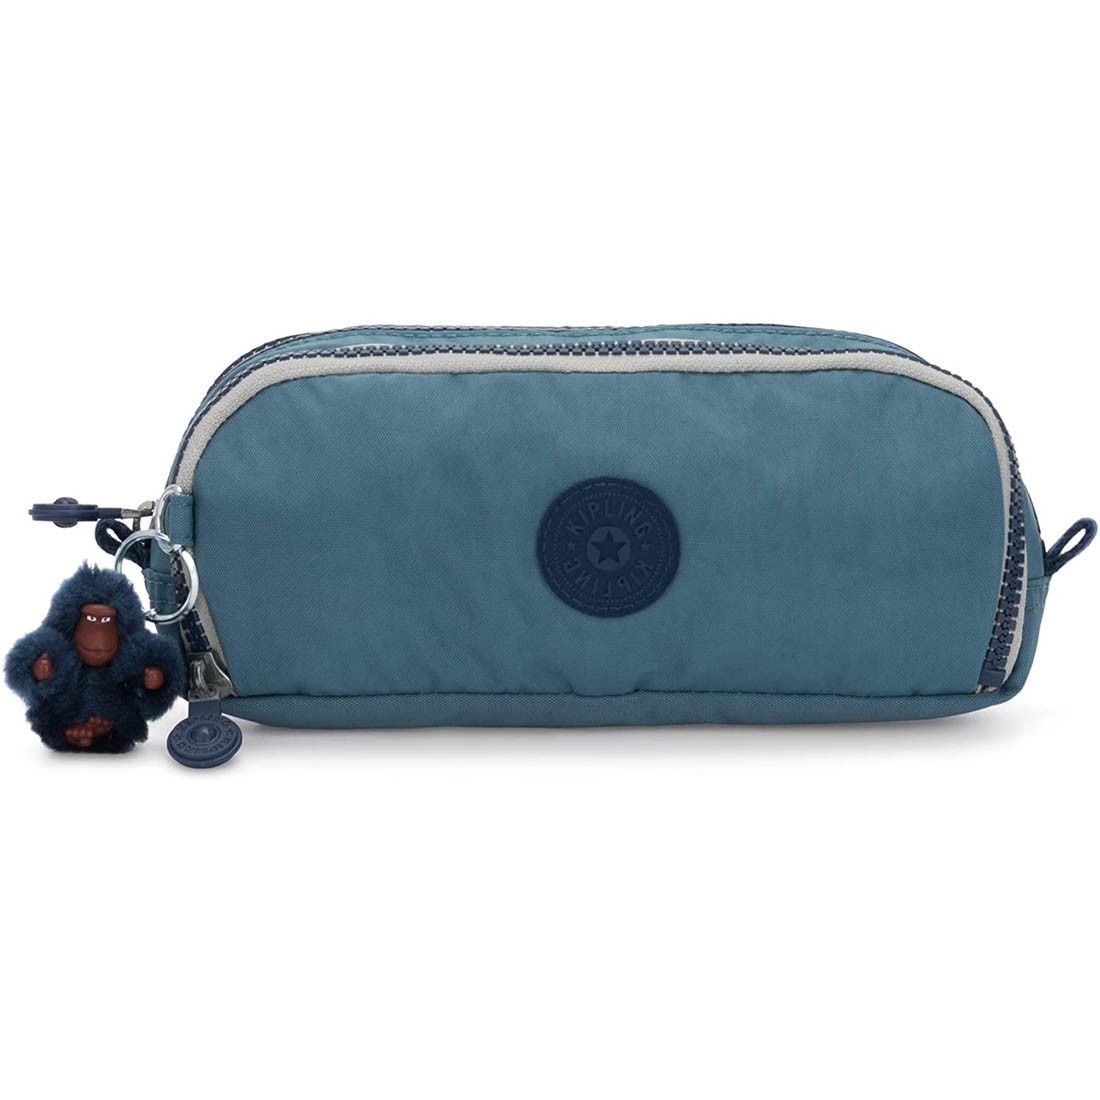 Buy Kipling Pencil Case Gitroy Baltic Aqua - Kipling, delivered to your  home | The Outfit